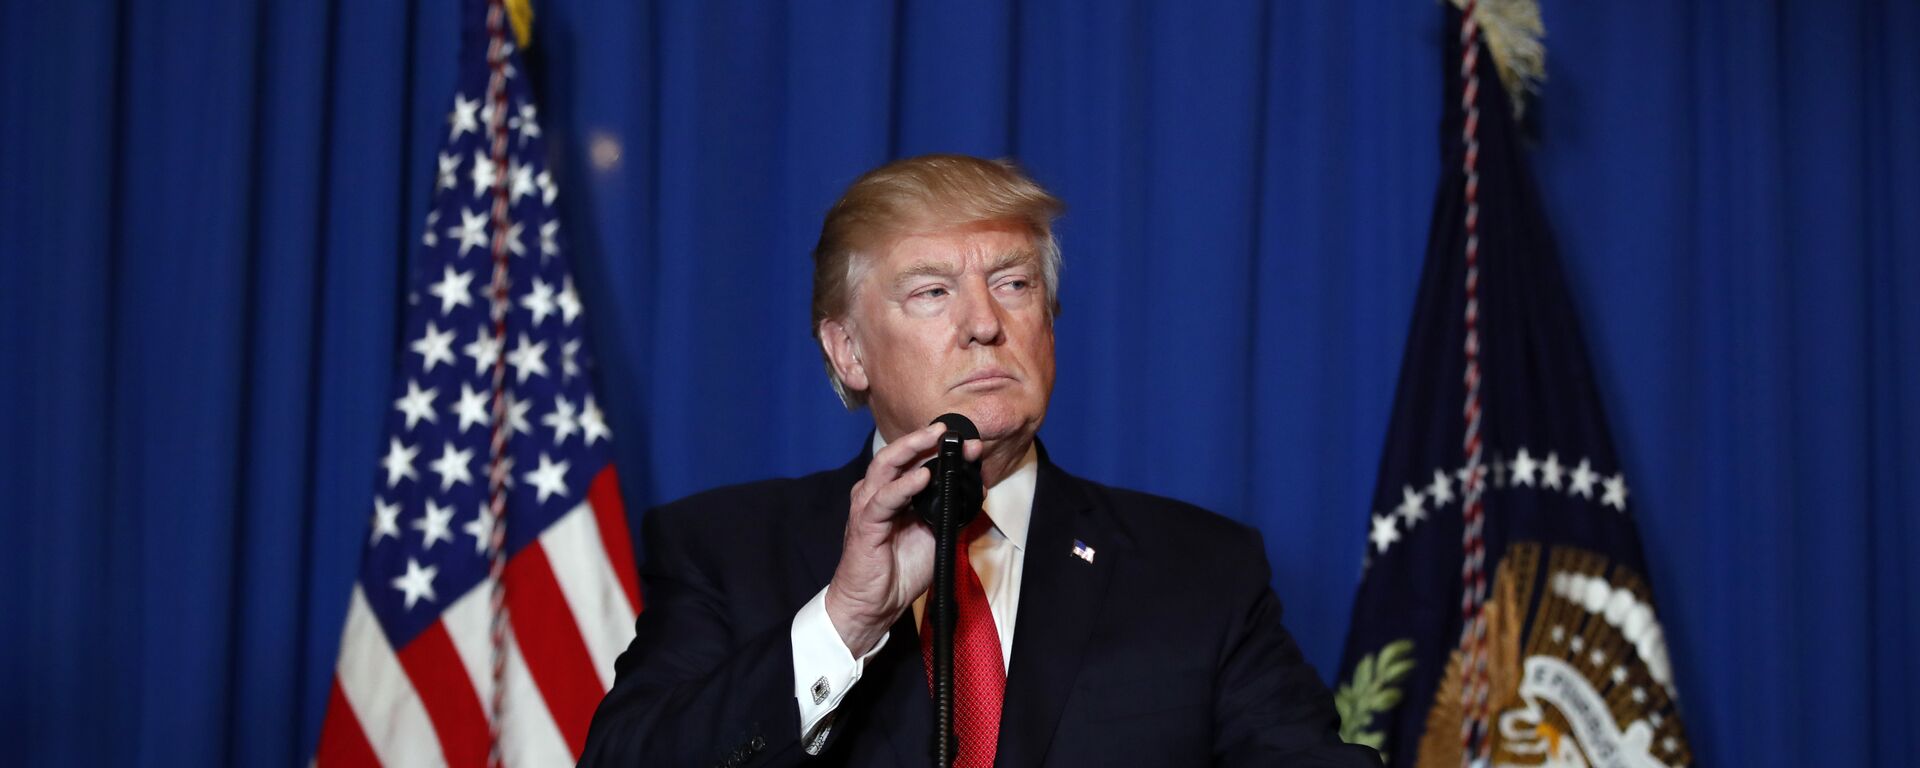 President Donald Trump speaks at Mar-a-Lago in Palm Beach, Fla., Thursday, April 6, 2017, after the U.S. fired a barrage of cruise missiles into Syria Thursday night in retaliation for this week's gruesome chemical weapons attack against civilians. - Sputnik International, 1920, 02.04.2023